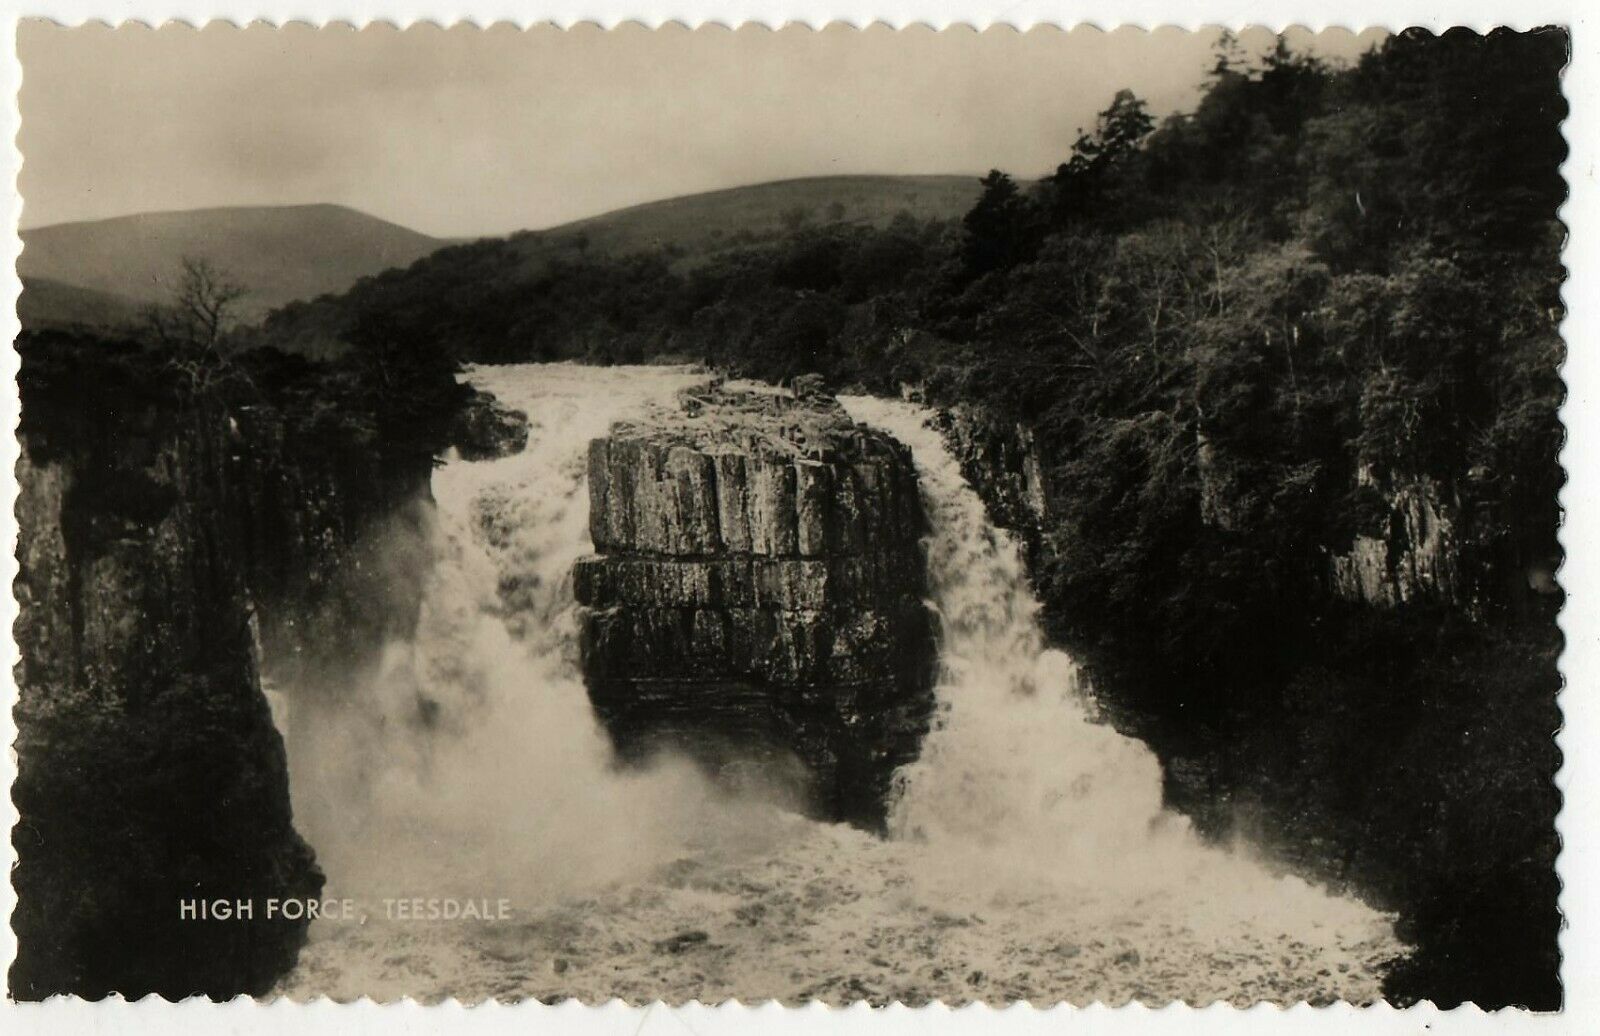 House Clearance - HIGH FORCE, TEESDALE unused topographical service - vgc